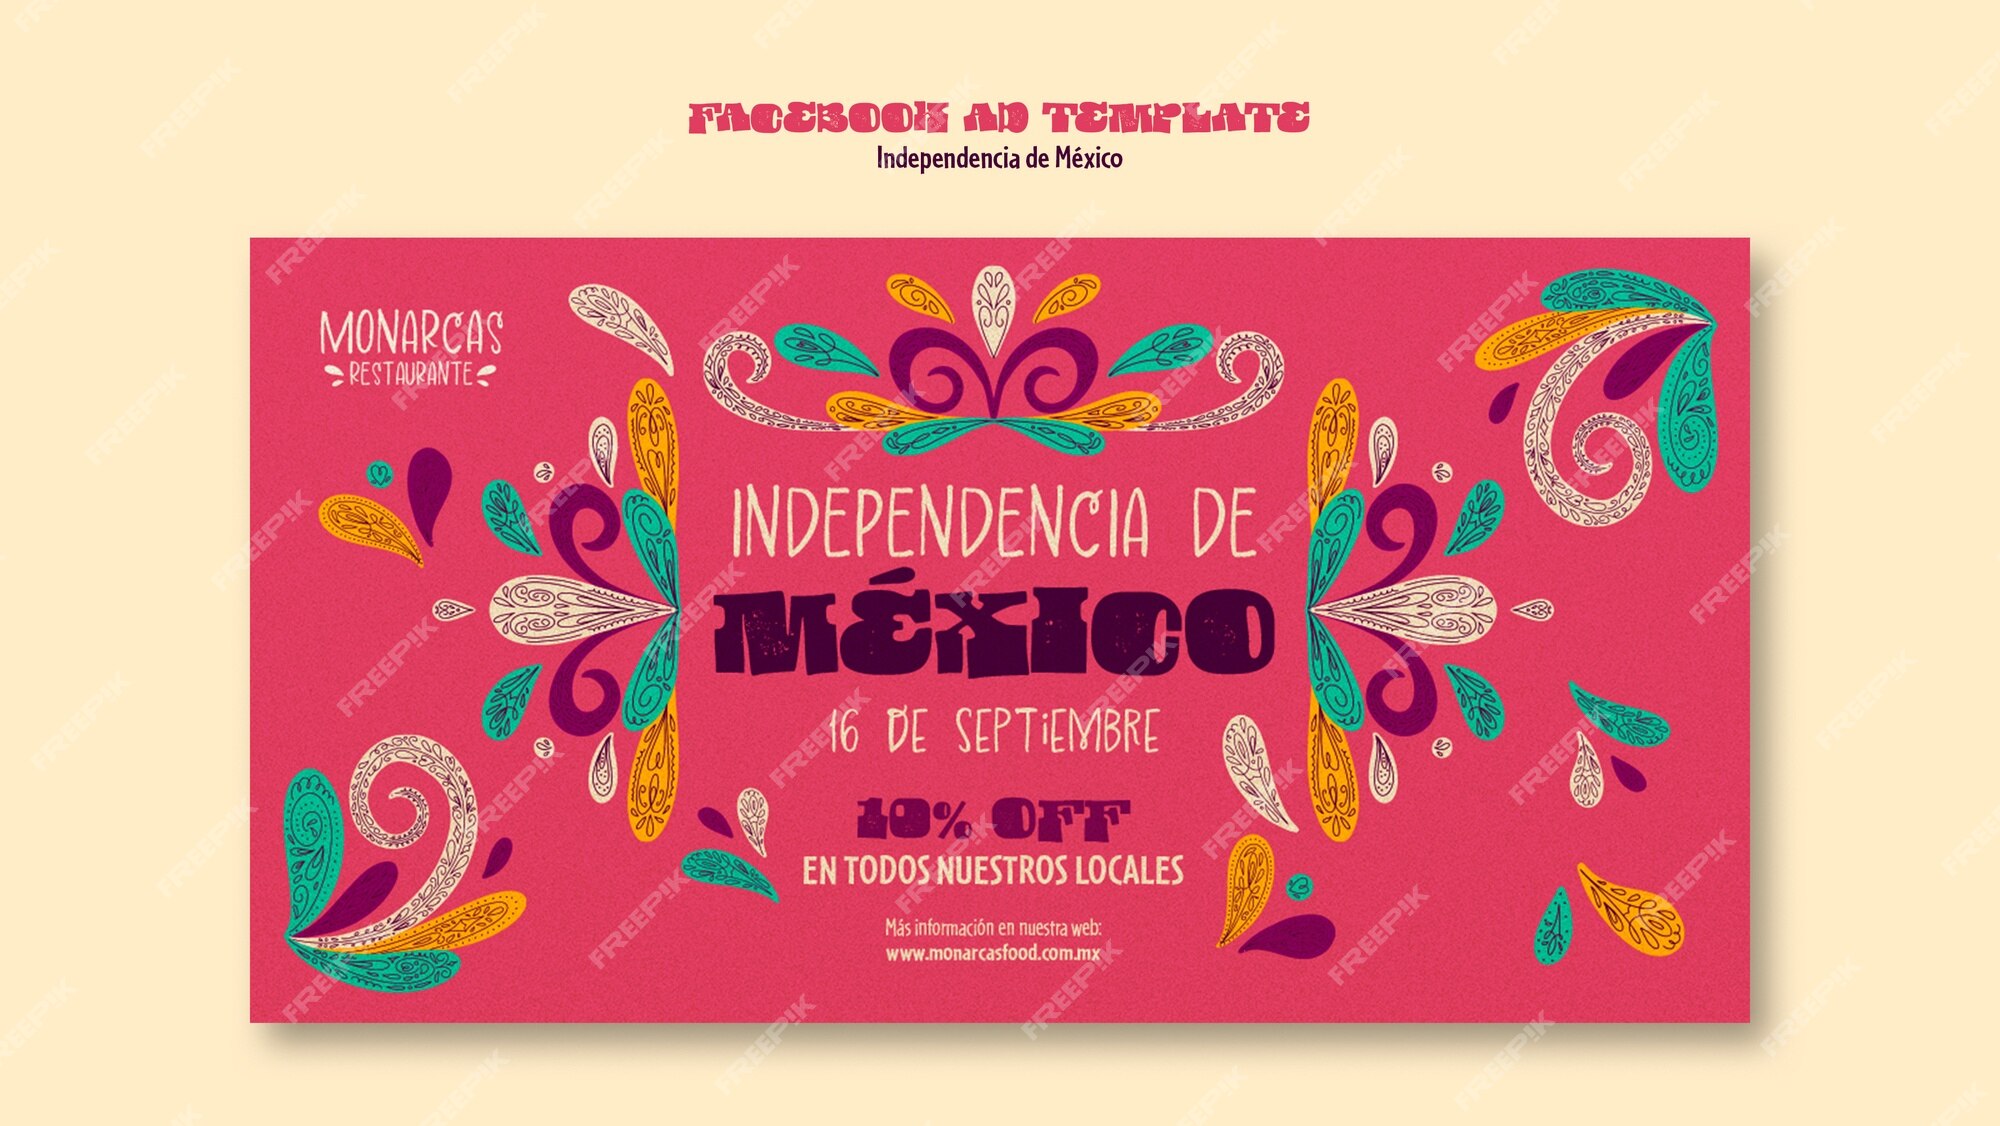 Mexico Colorful PSD, 1,000+ High Quality Free PSD Templates for Download